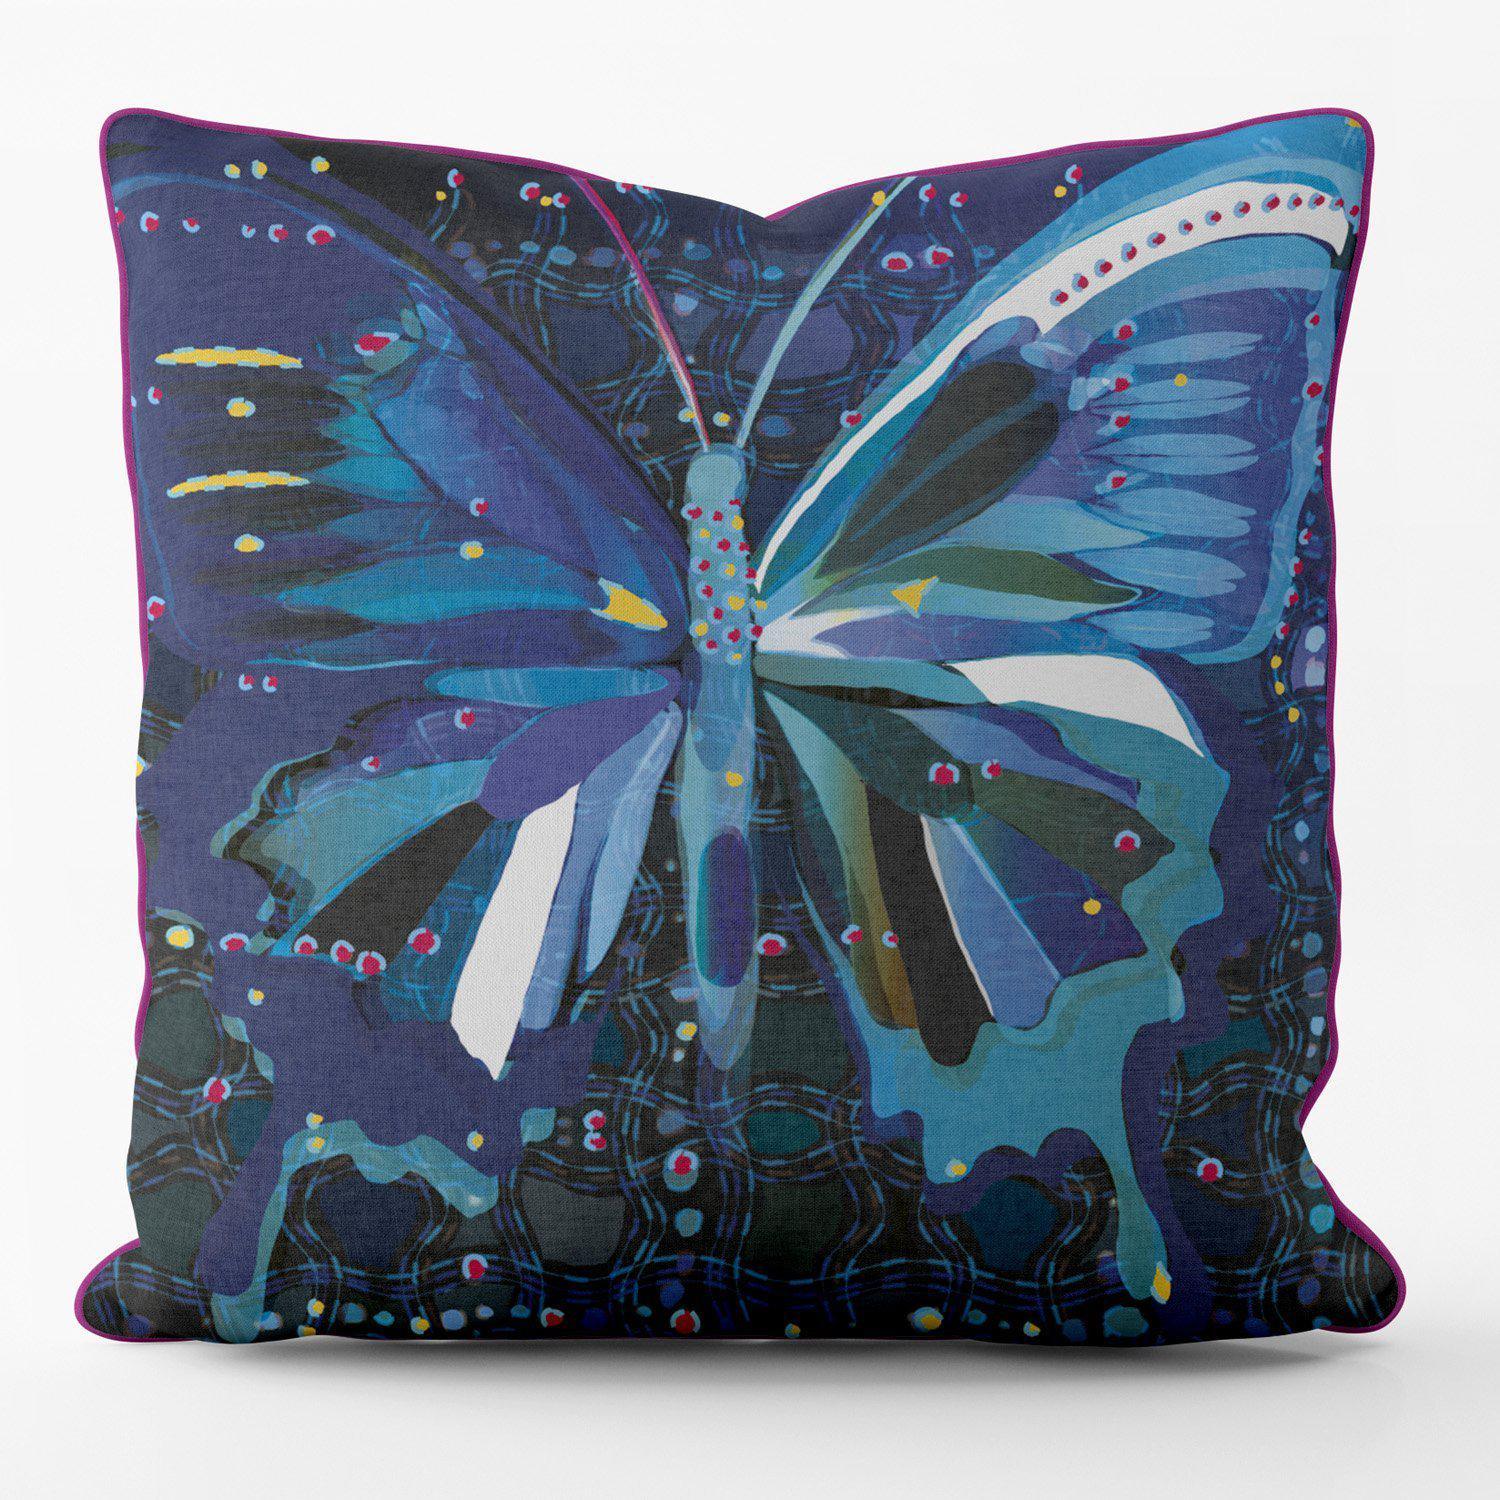 Patchwork Butterfly (Purple) - Funky Art Cushion - FOG - House Of Turnowsky Pillows - Handmade Cushions UK - WeLoveCushions